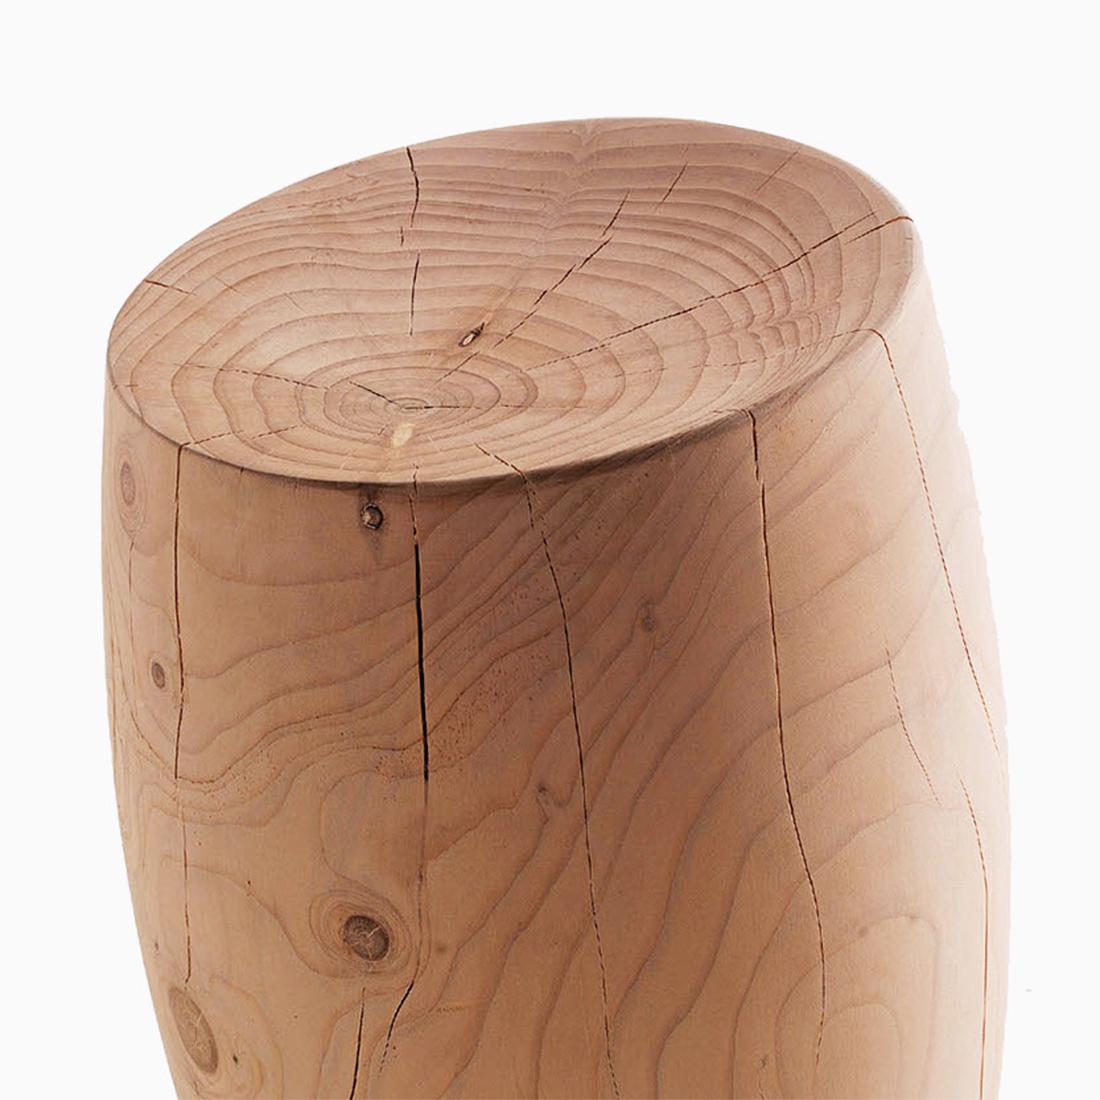 Stool Stelon cedar in solid natural aromatic cedar wood. 
Made in one block of cedar wood. Treated with natural 
pine extracts wax. Solid cedar wood include movement, 
cracks and changes in wood conditions, this is the essential 
characteristic